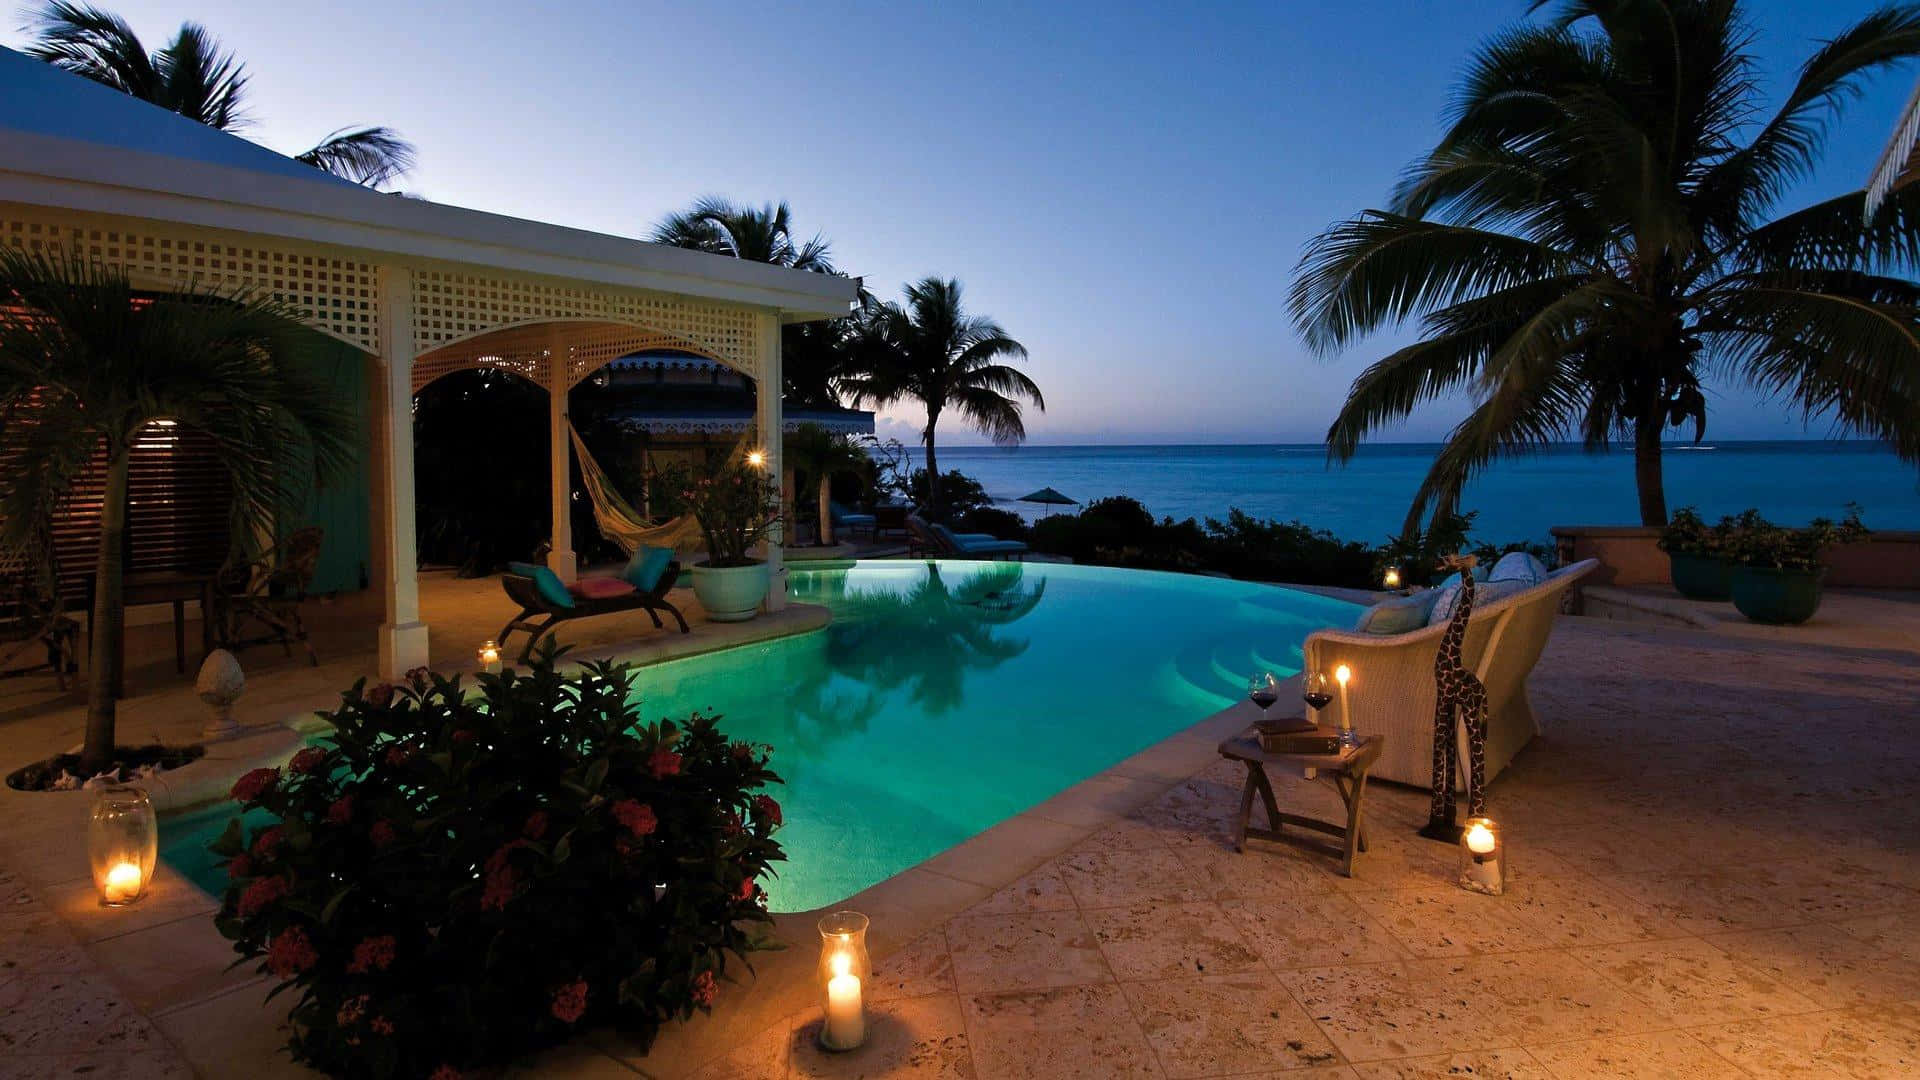 A Pool With Candles And Chairs At Night